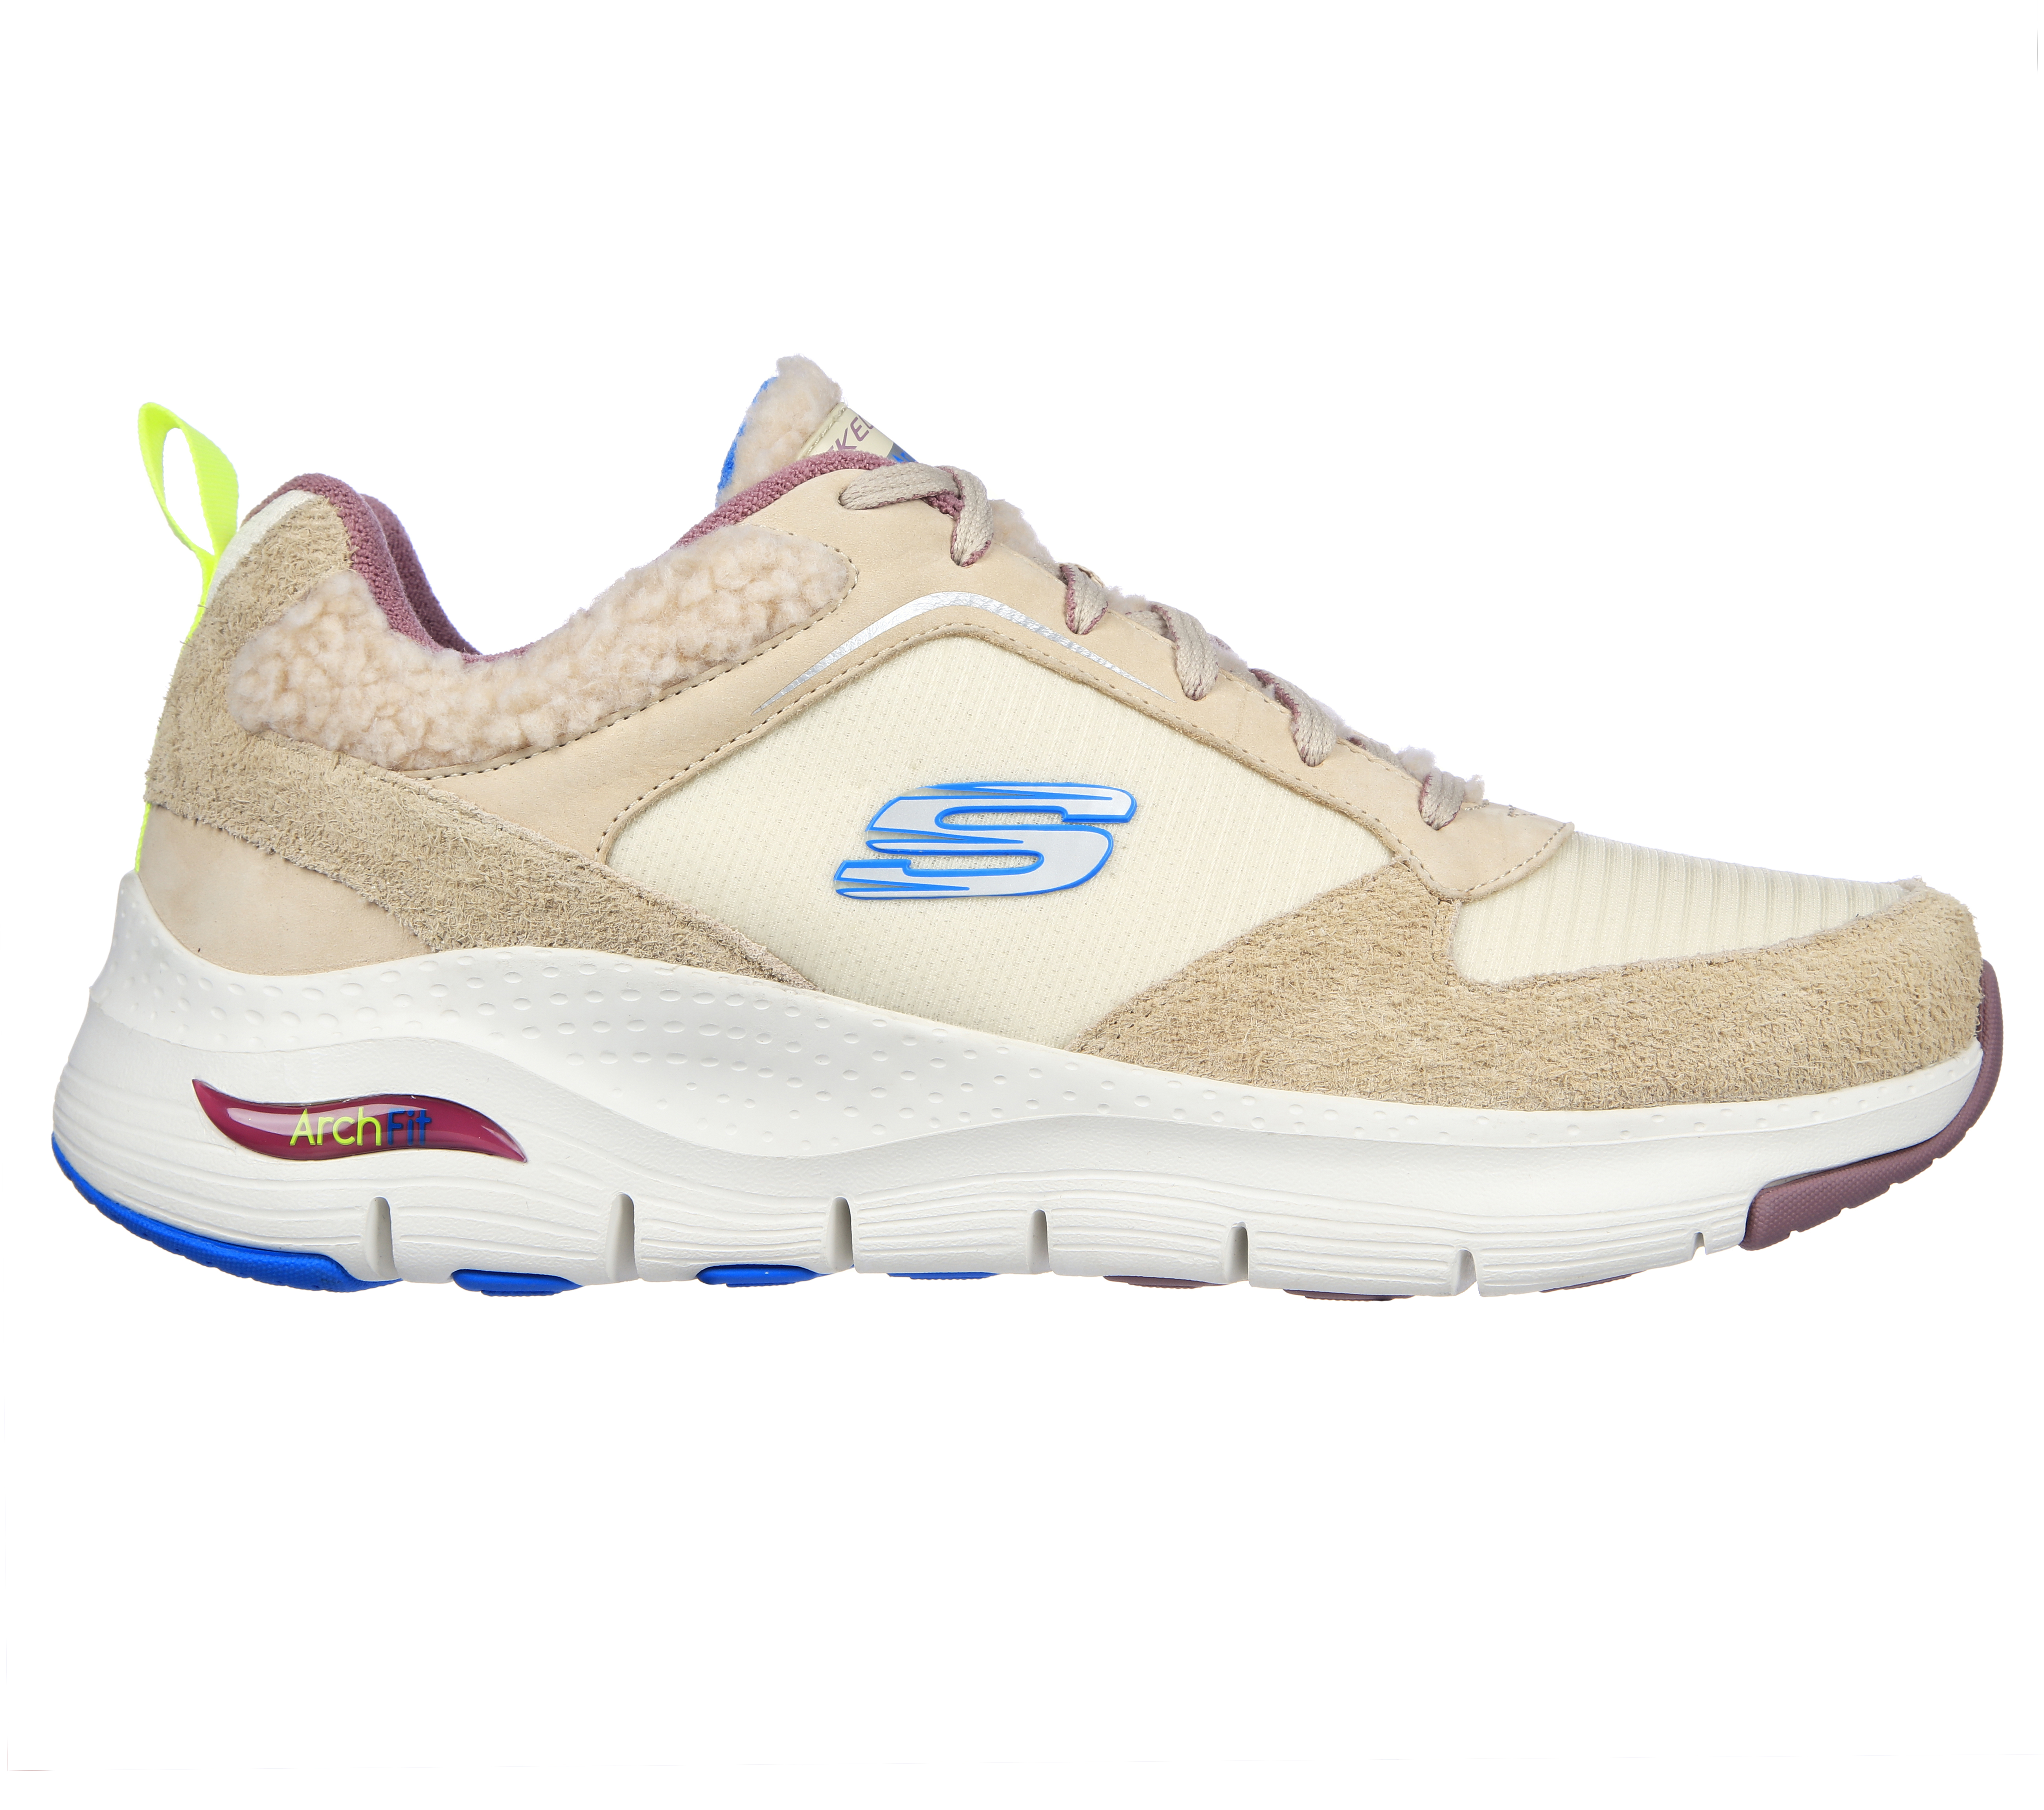 Shop the Skechers Luxe Collection 